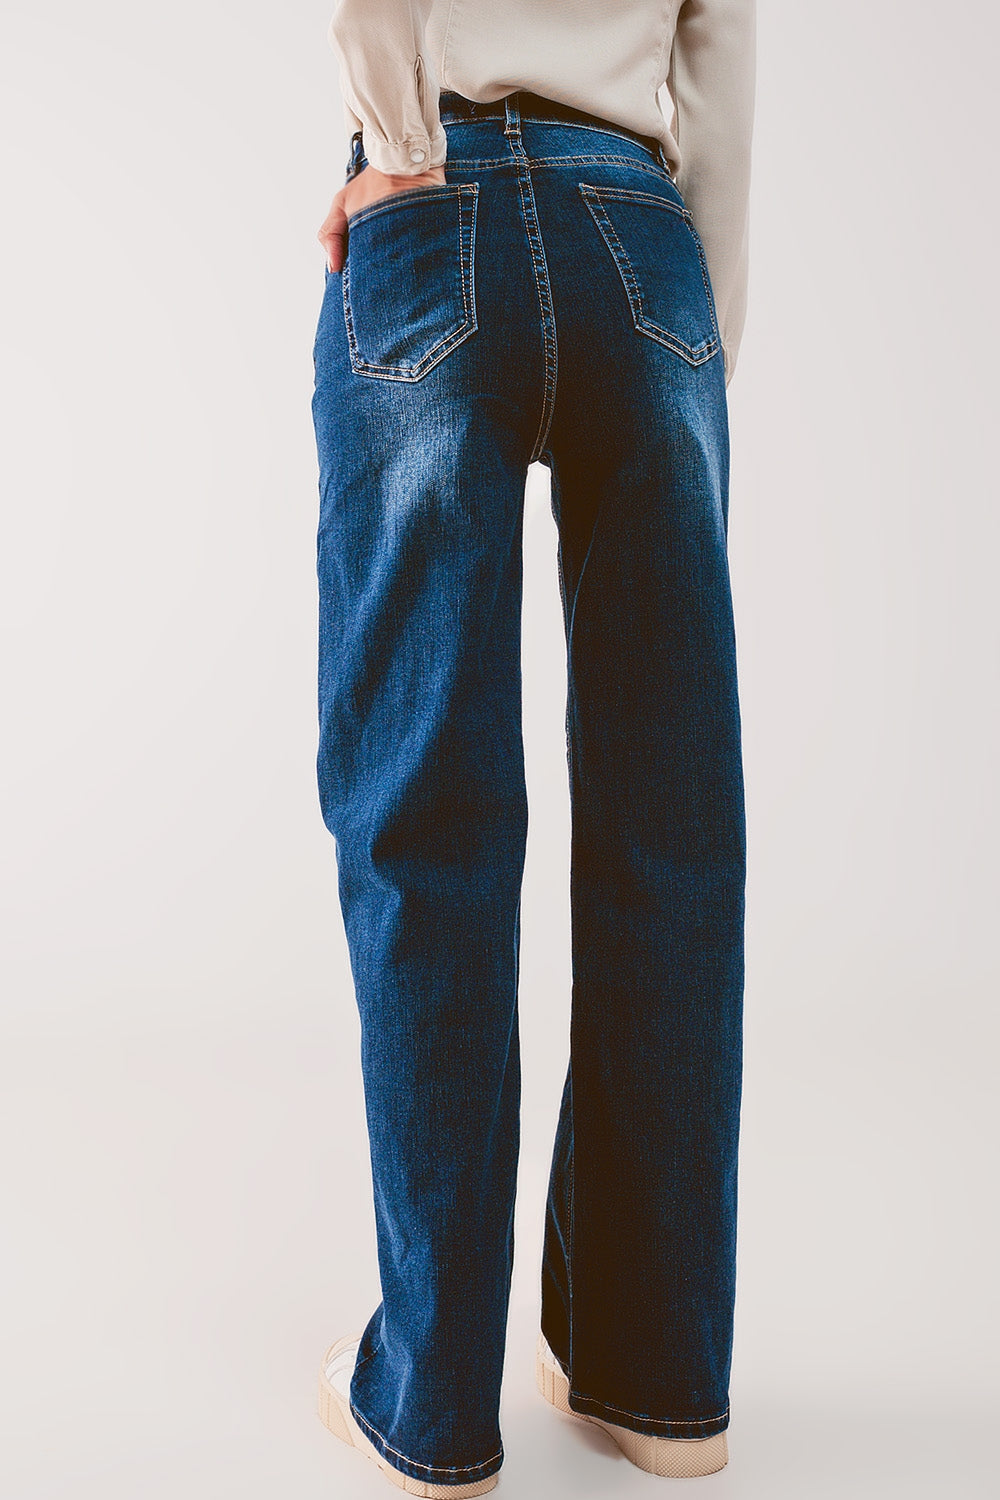 Straight Leg 90s Jeans With in Dark Blue